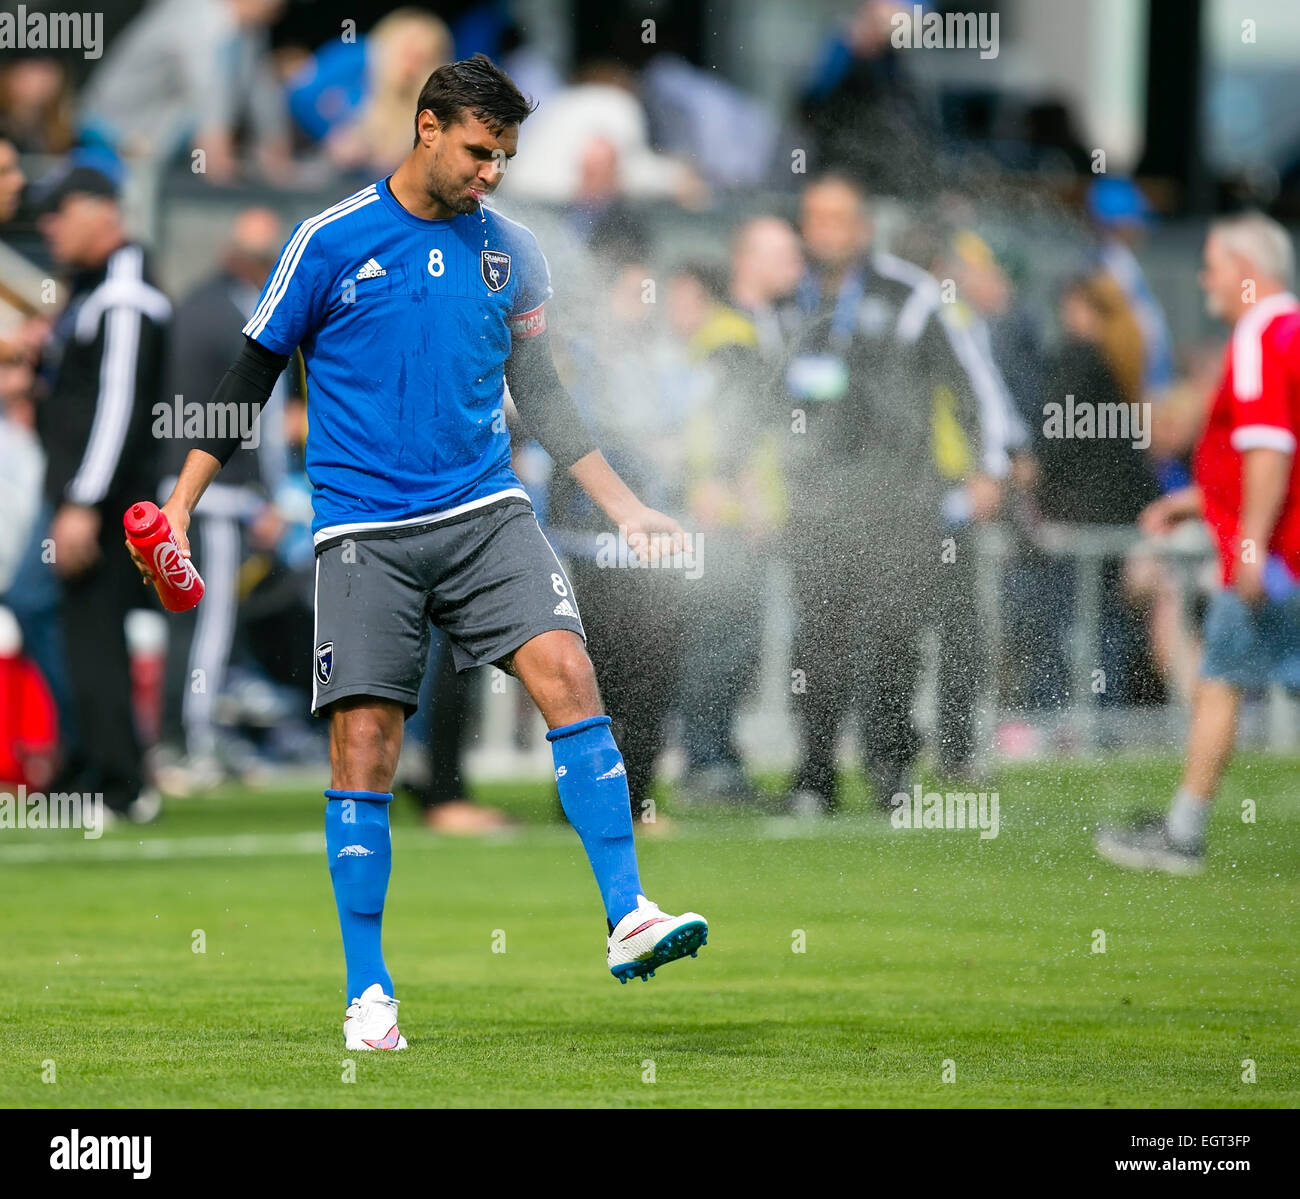 CORRECTED DATE** February 28, 2015: San Jose Earthquakes forward Chris Wondolowski (8) spits water prior to the MLS soccer game between the San Jose Earthquakes and Los Angeles Galaxy at Avaya Stadium in San Jose, CA. The Earthquakes lead LA 2-1 in the second half. Damon Tarver/Cal Sport Media Stock Photo